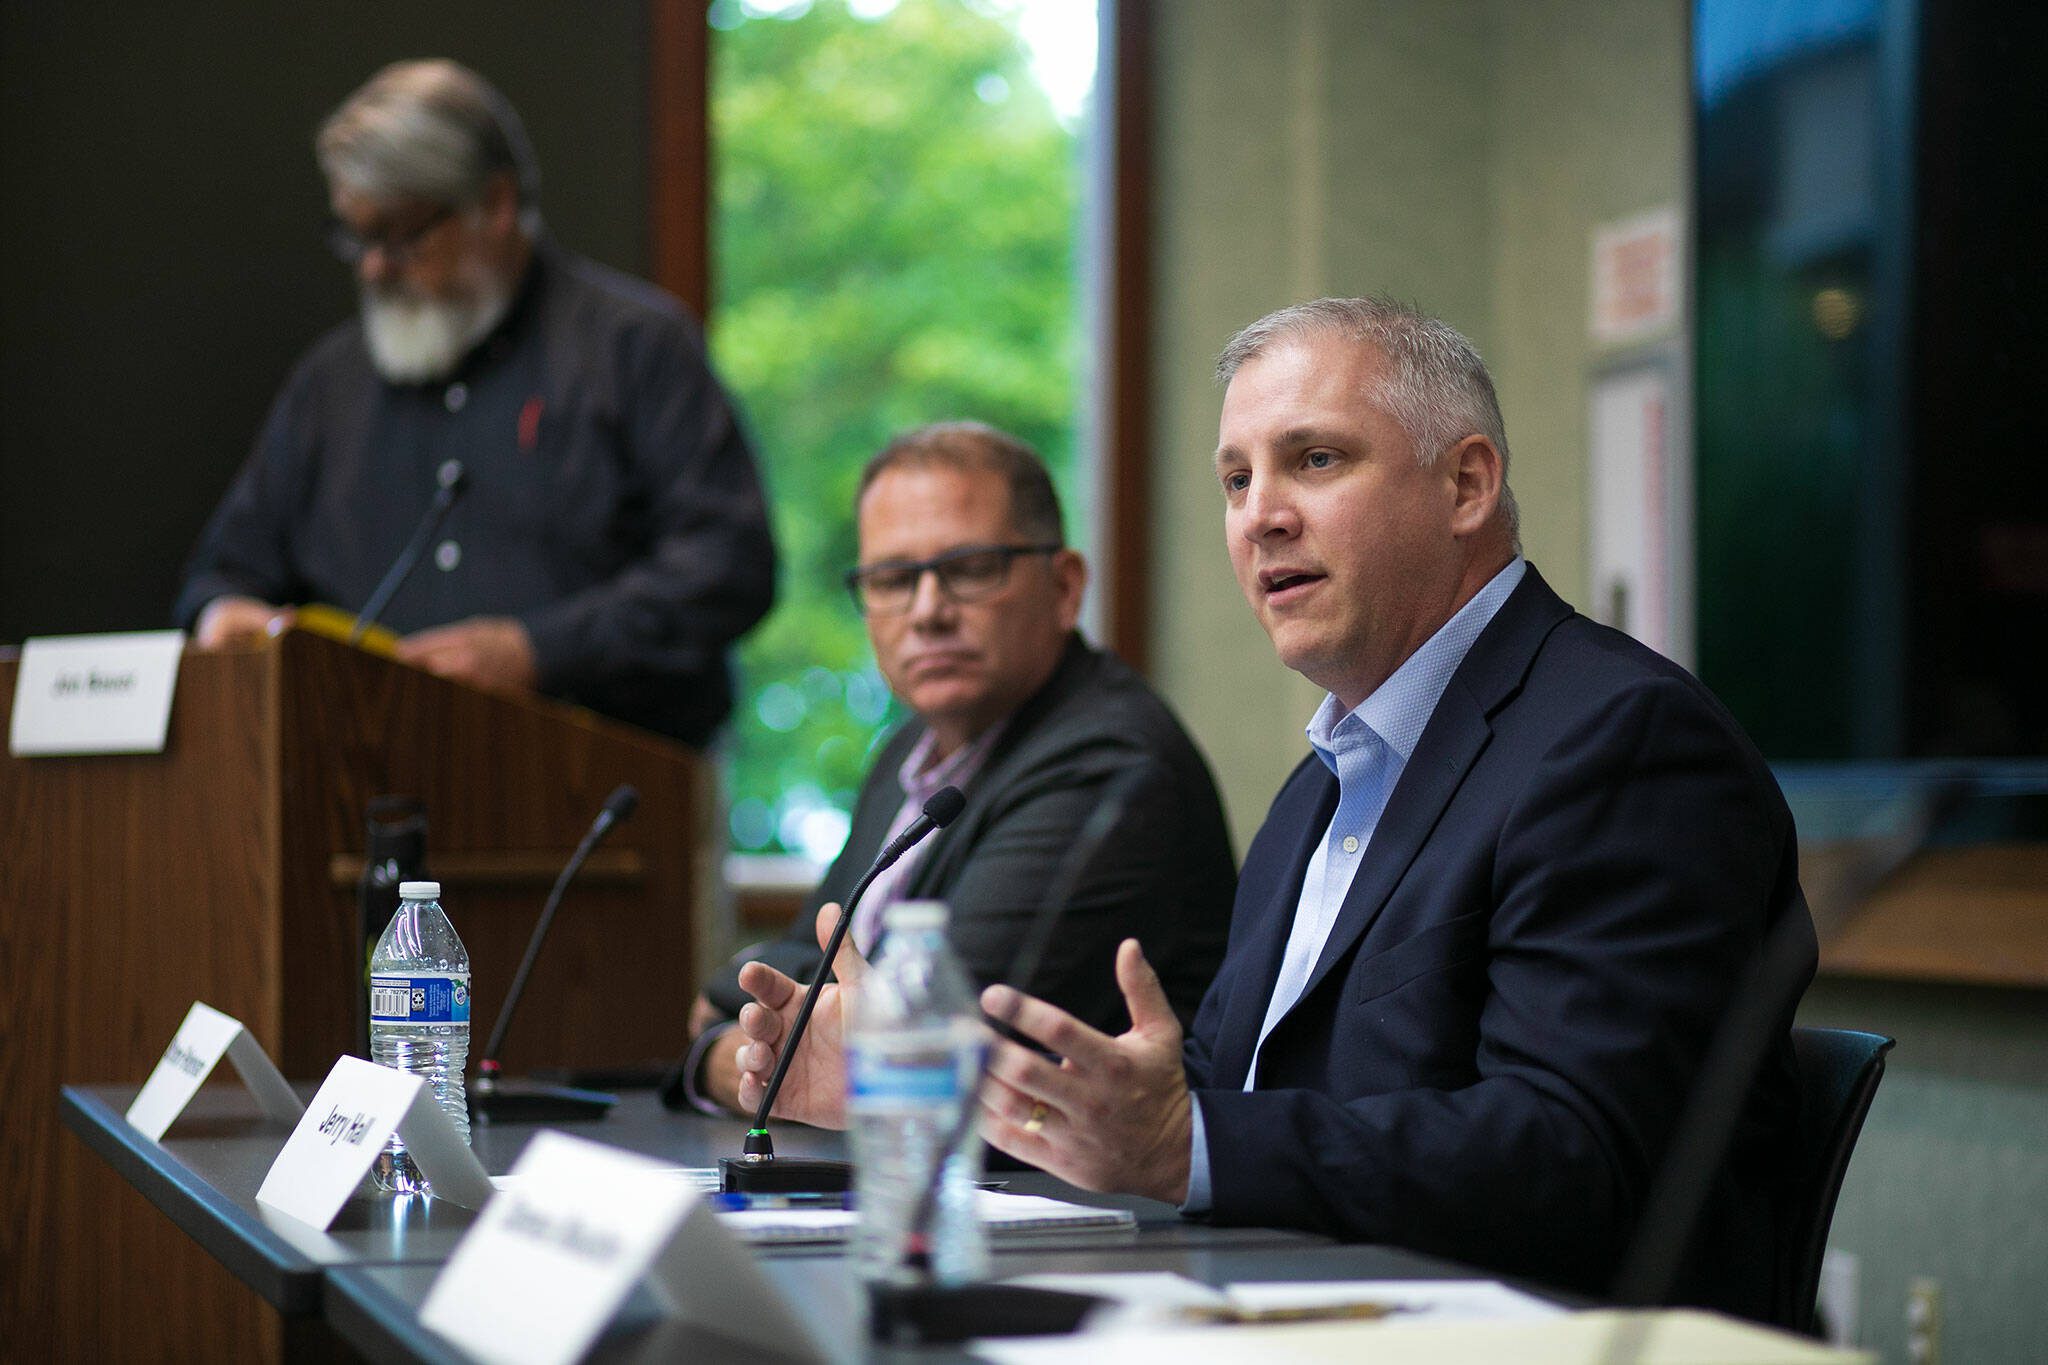 Jerry Hall, executive director of the Master Builders Association of Snohomish and King Counties, speaks during the Everett Herald’s public forum on affordable housing at the Lynnwood Library on Thursday, Sept. 14, 2023, in Lynnwood, Washington. (Ryan Berry / The Herald)